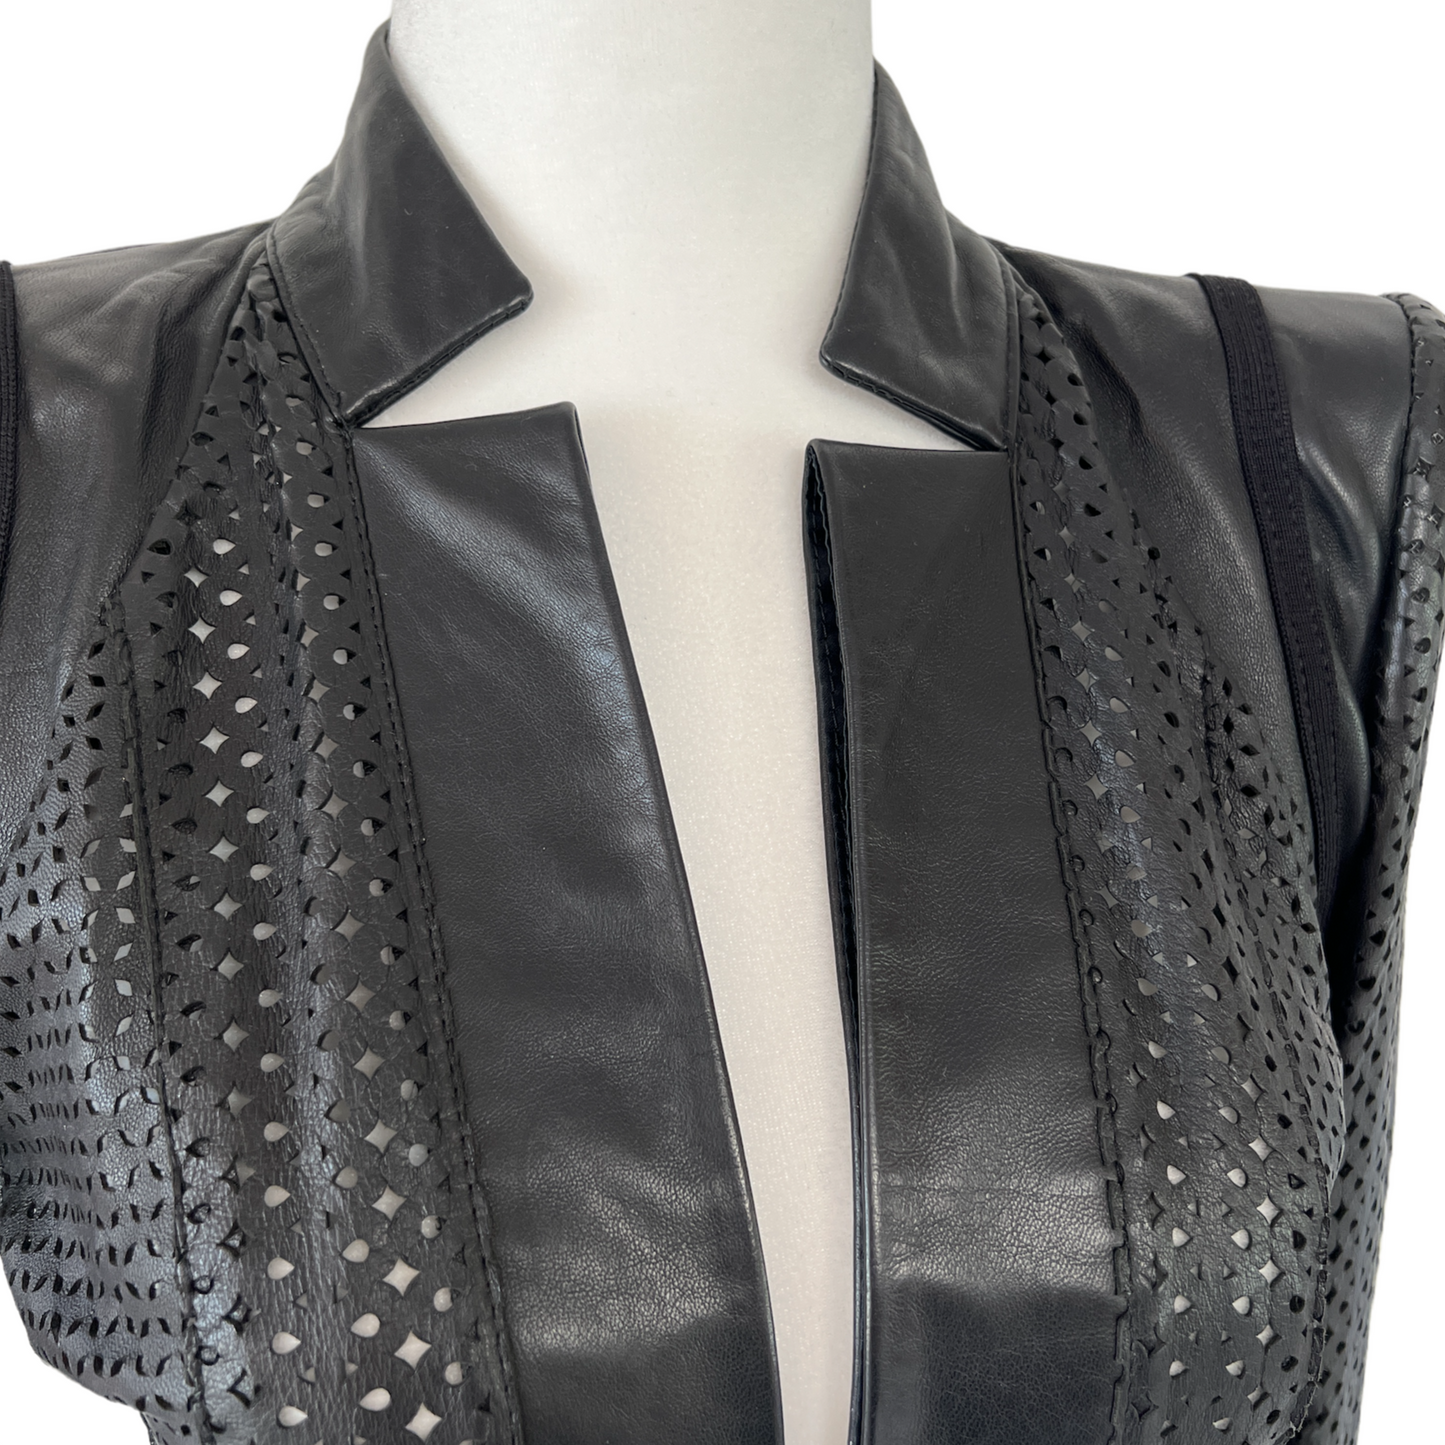 Leather Perforated Jacket - XS